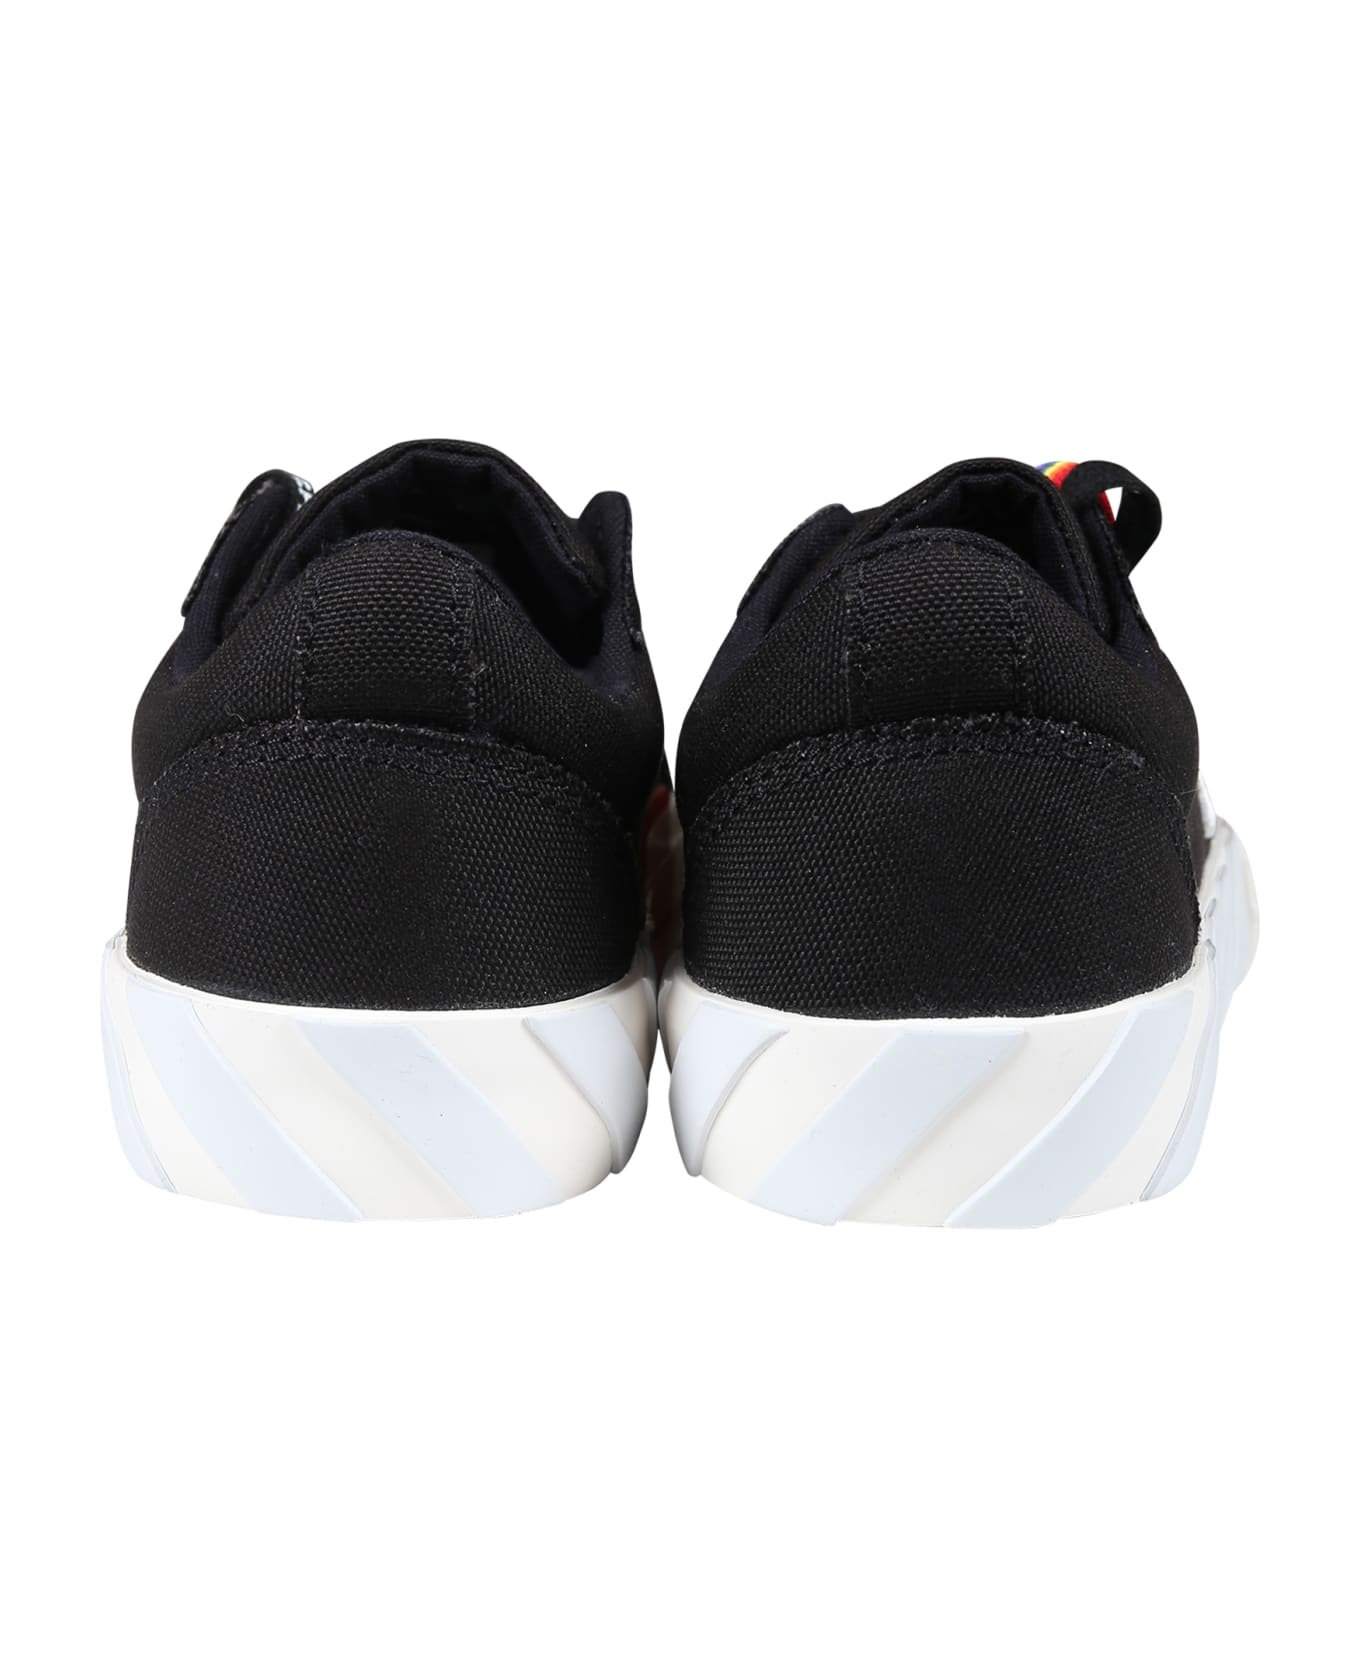 Off-White Black Sneakers For Girl With Arrow - Black シューズ